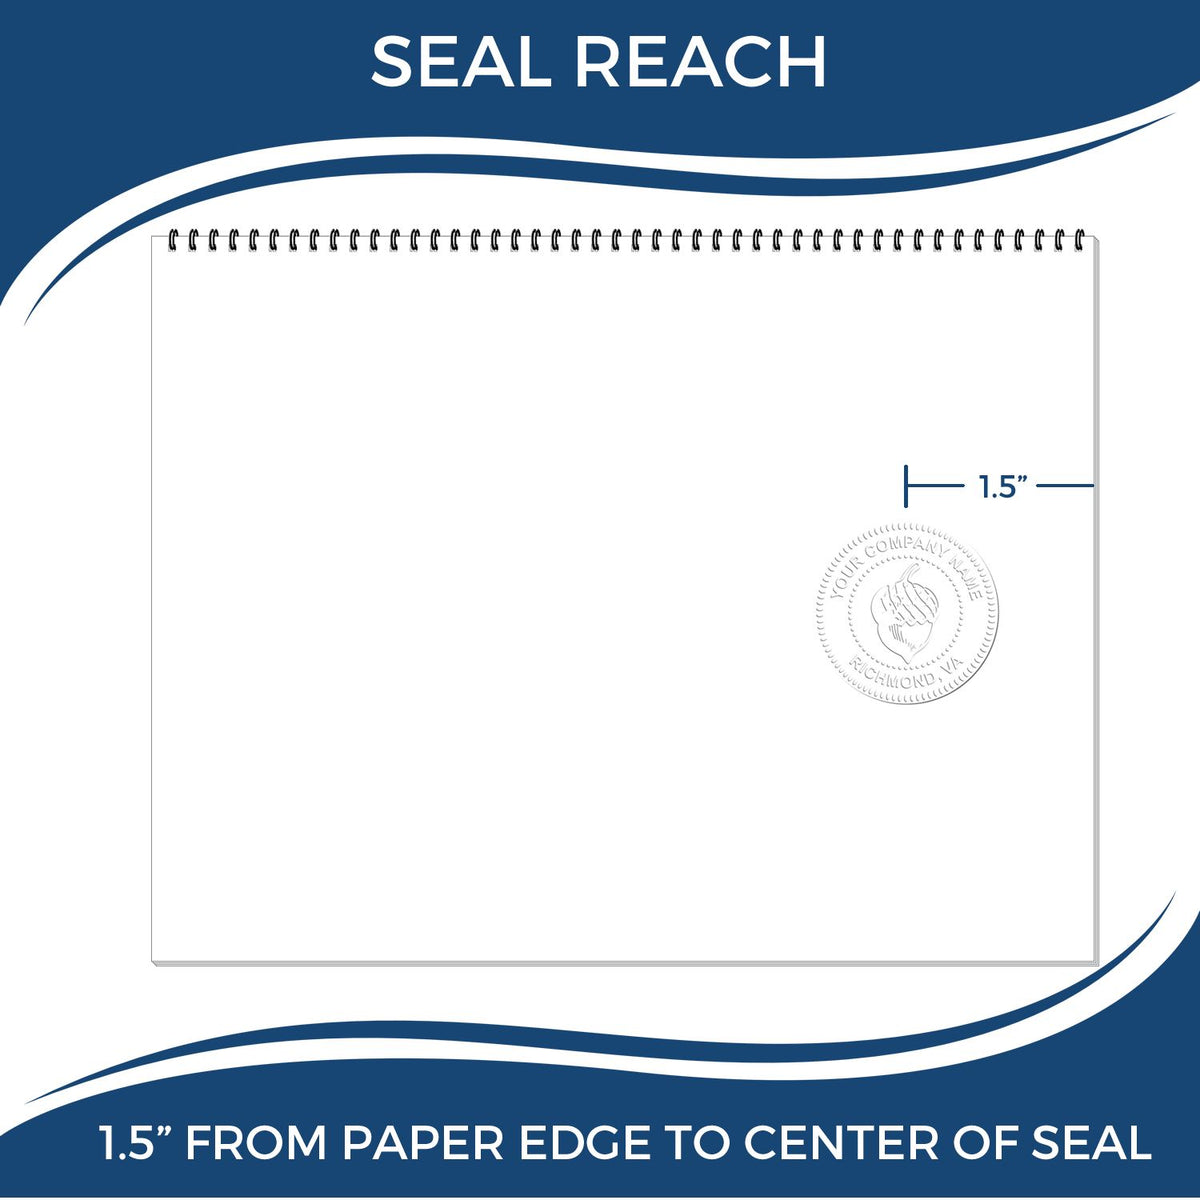 An infographic showing the seal reach which is represented by a ruler and a miniature seal image of the Handheld Kentucky Professional Geologist Embosser